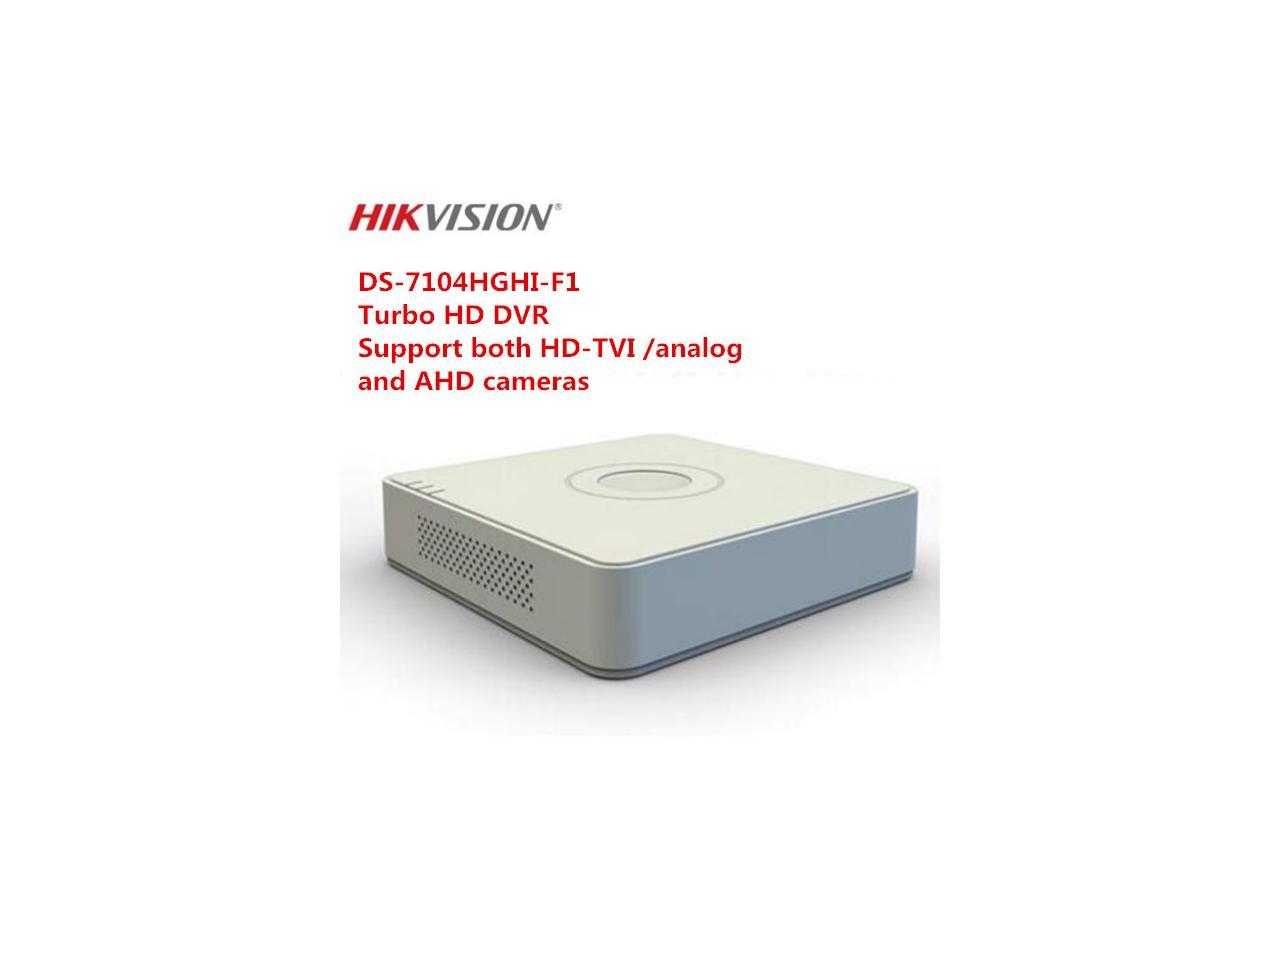 Hikvision Ds 7104hghi F1 4ch Dvr Support Hd Tvi Analog Ahd Cameras English Version Can Upgrade Newegg Com